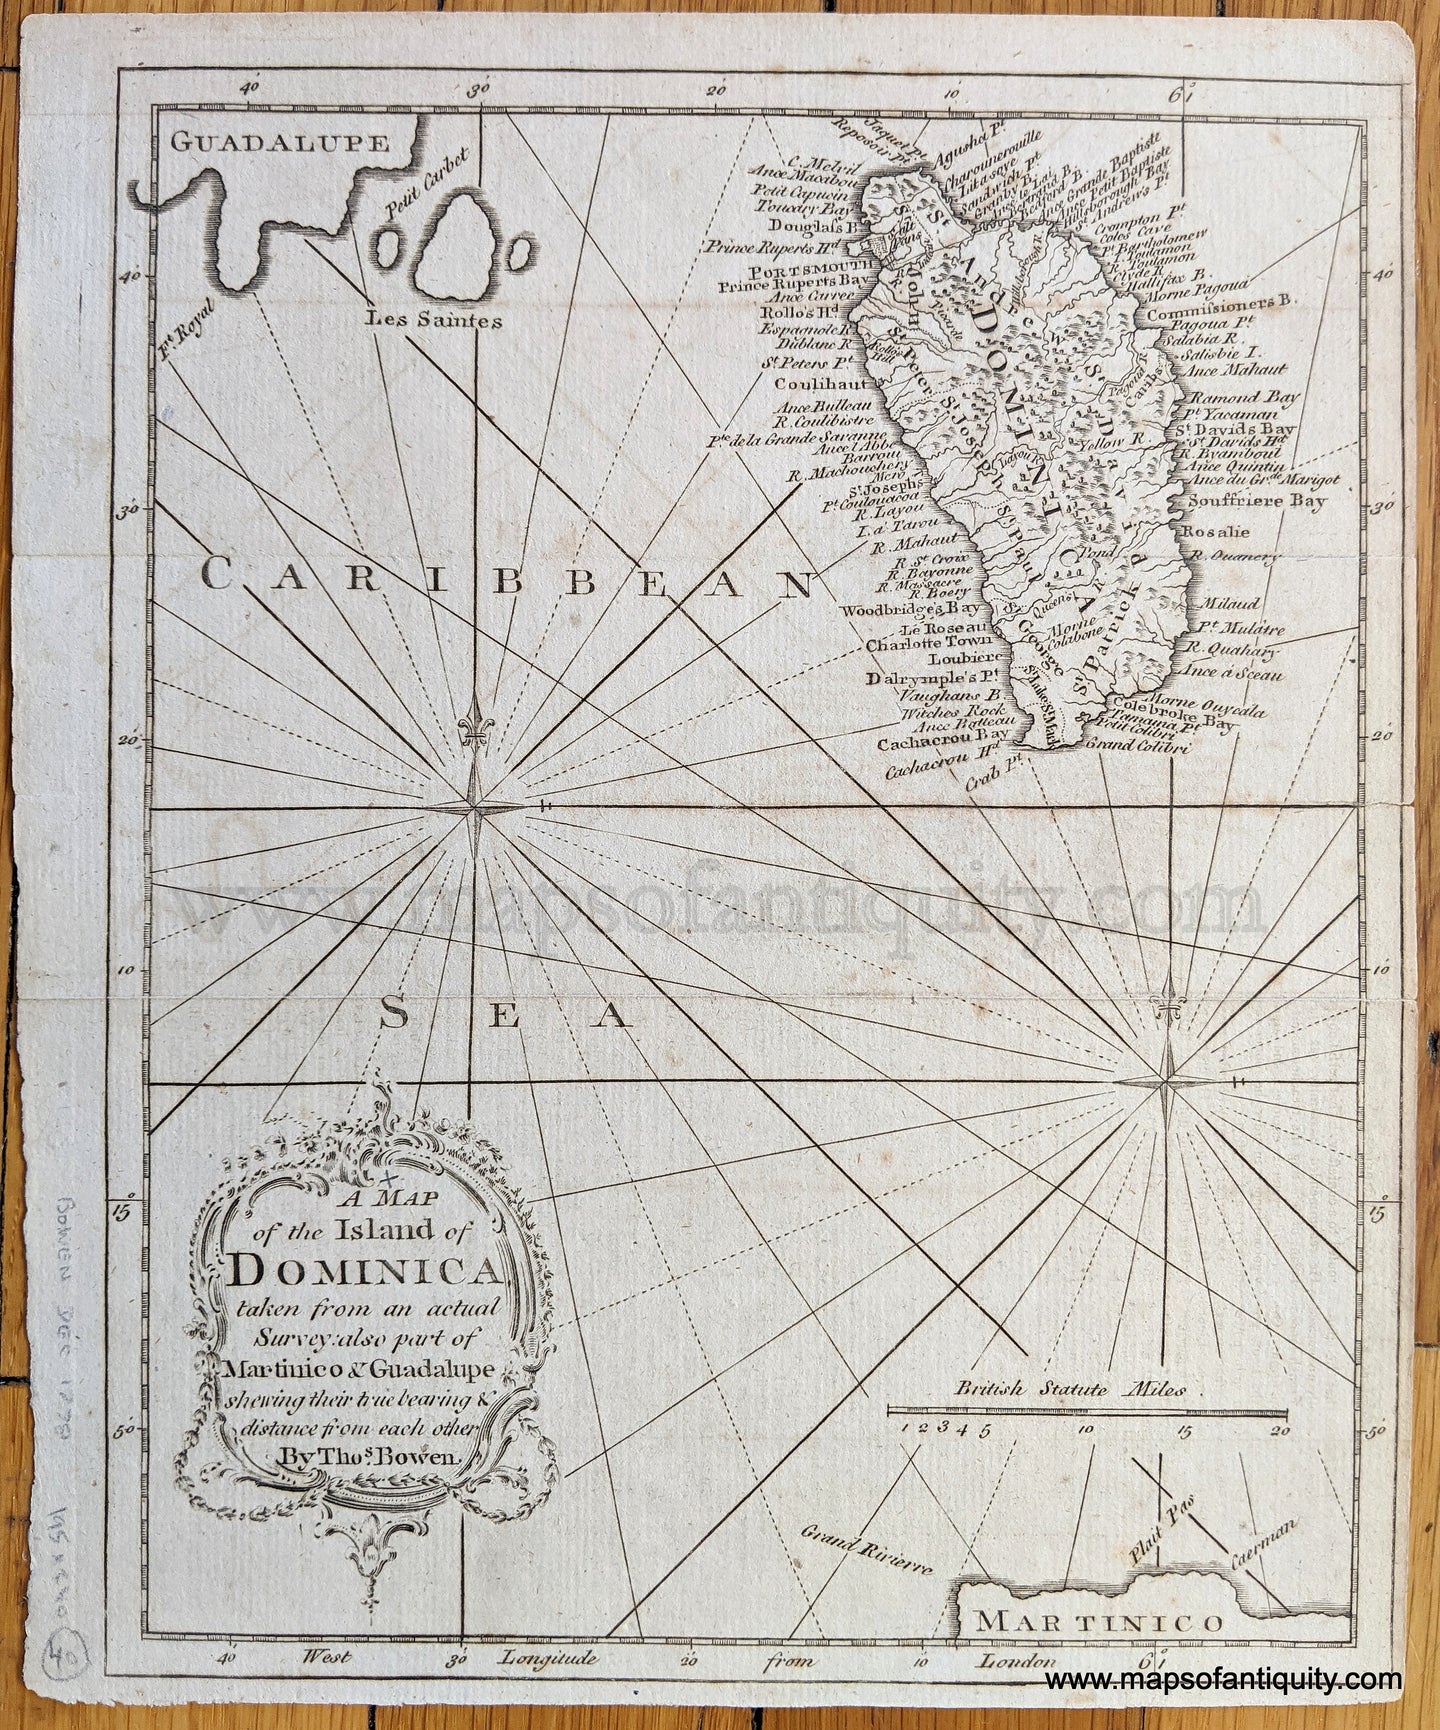 Genuine-Antique-Map-A-Map-of-the-Island-of-Dominica-taken-from-an-actual-Survey:-also-part-of-Martinico-&-Guadalupe-shewing-their-true-bearing-&-distance-from-each-other.-Caribbean--1778-Thomas-Bowen-Maps-Of-Antiquity-1800s-19th-century